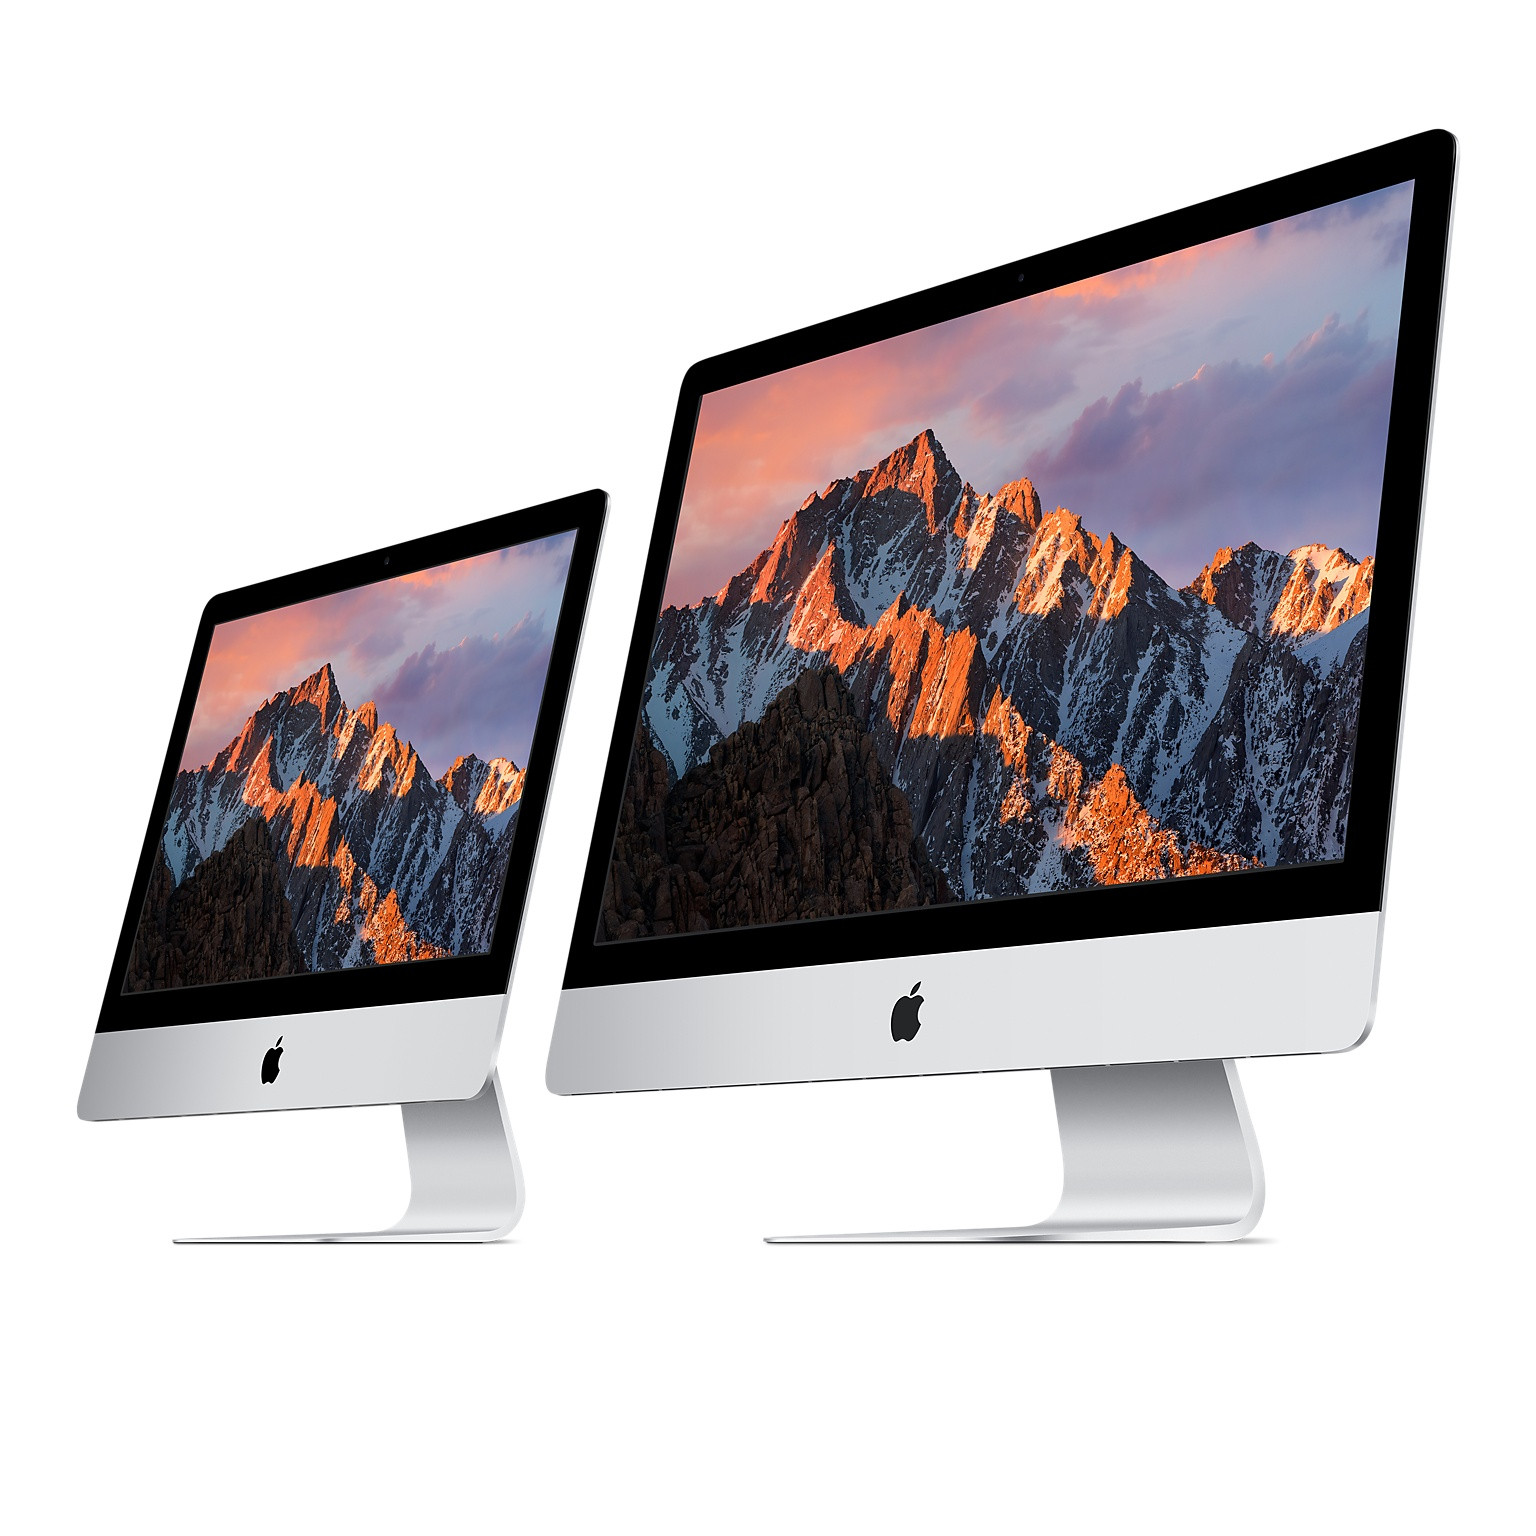 What Is Best Keyboard For Imac Os X 10.9.5